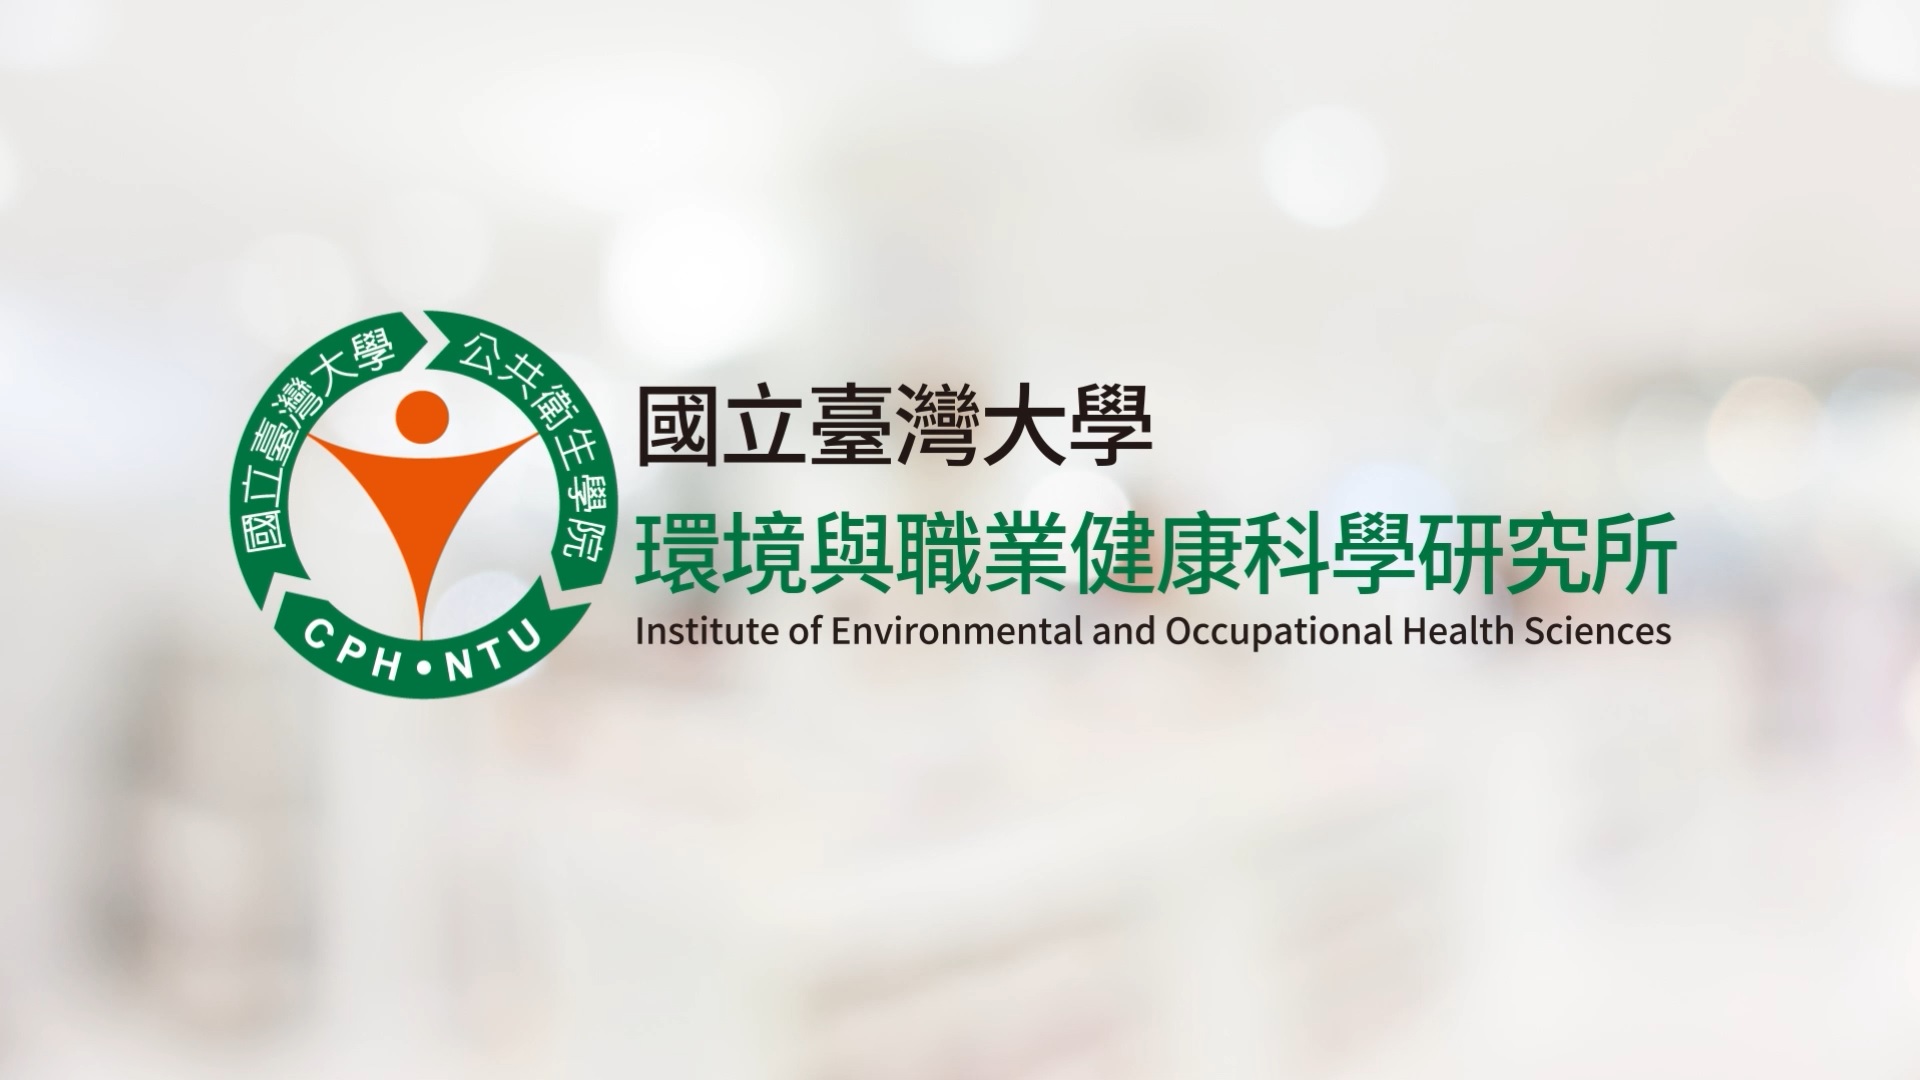 Research Highlight – Institute of Environmental and Occupational Health Sciences